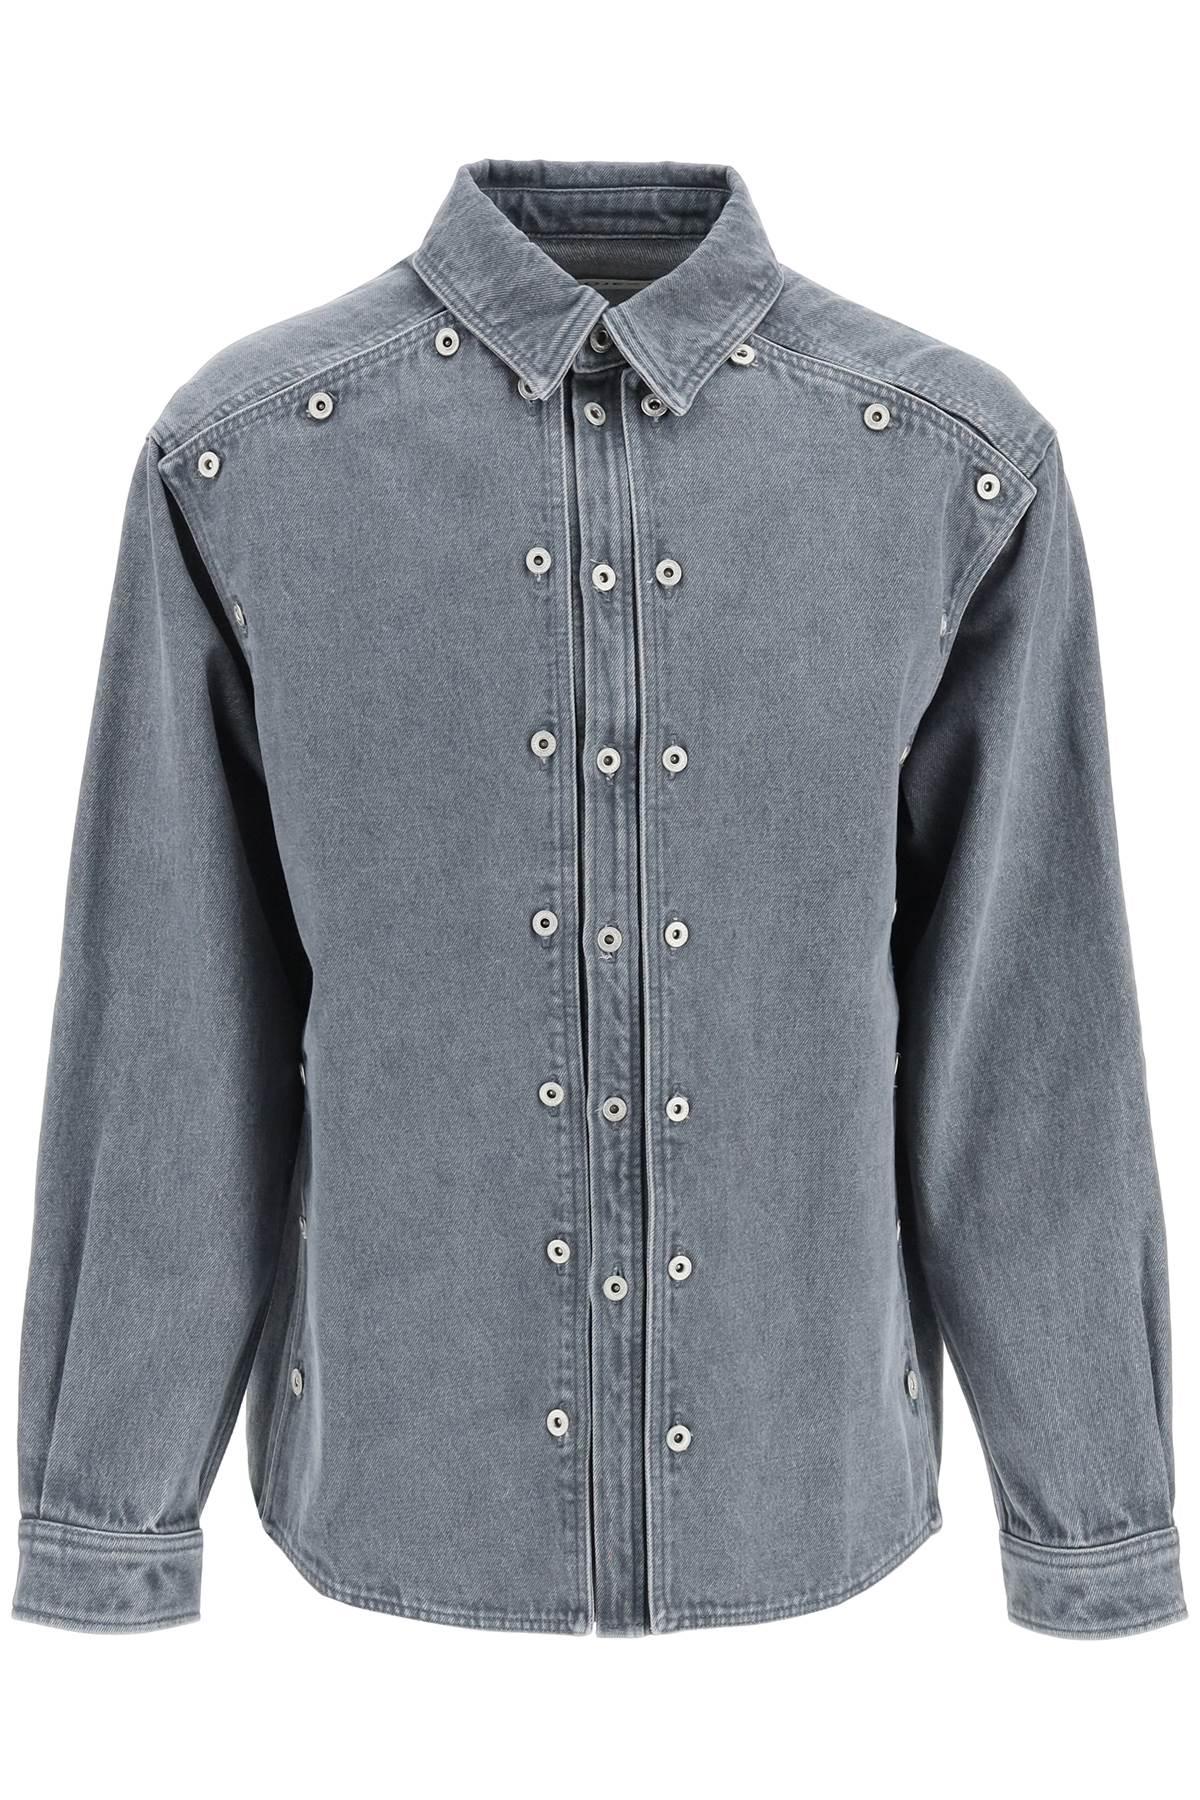 Y. Project Denim Jacket With Overlying Panels in Gray for Men | Lyst